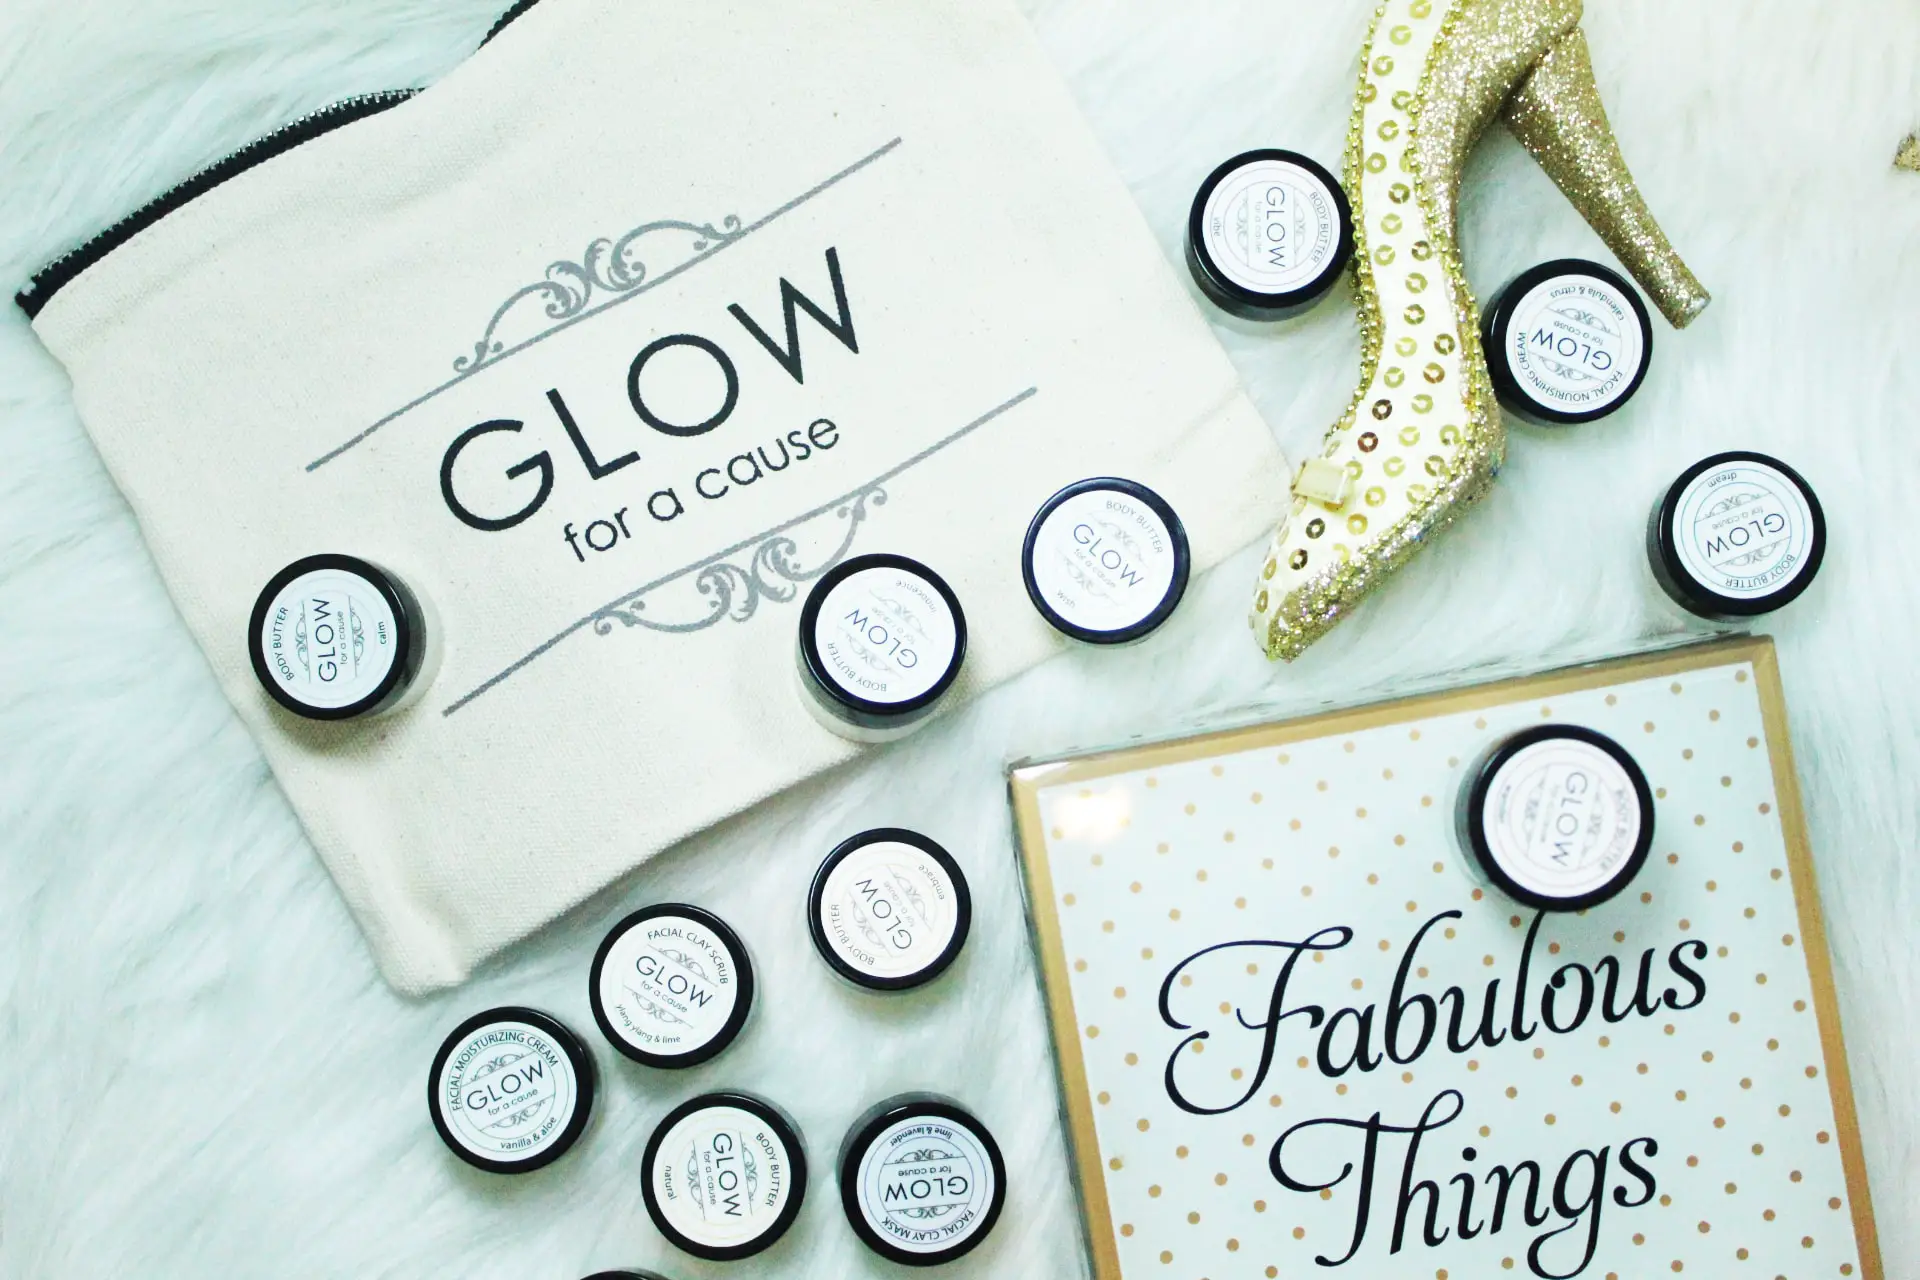 One Fabulous Makeup Bag for the Holidays: GLOW For A Cause